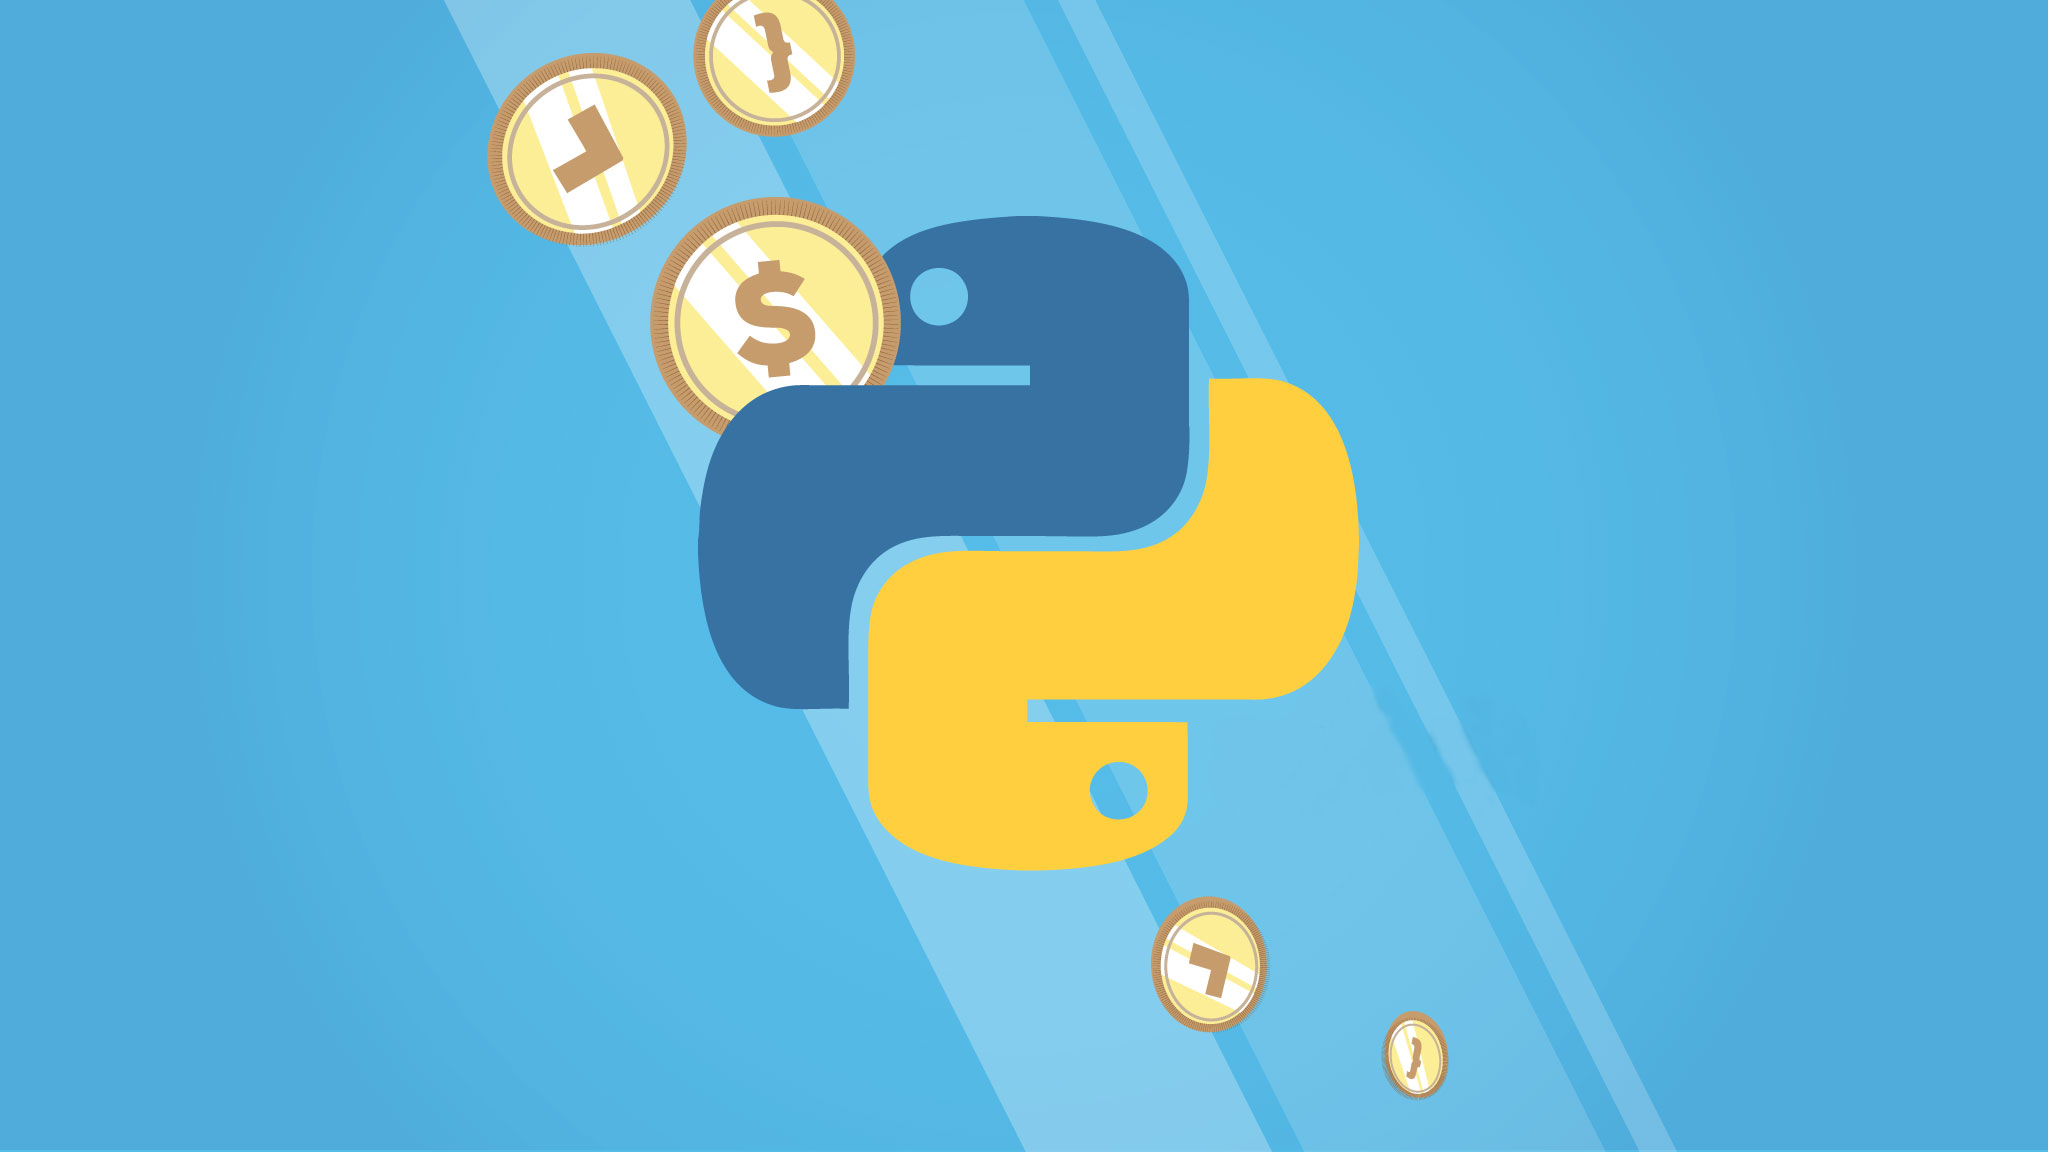 learn python by building a blockchain & cryptocurrency